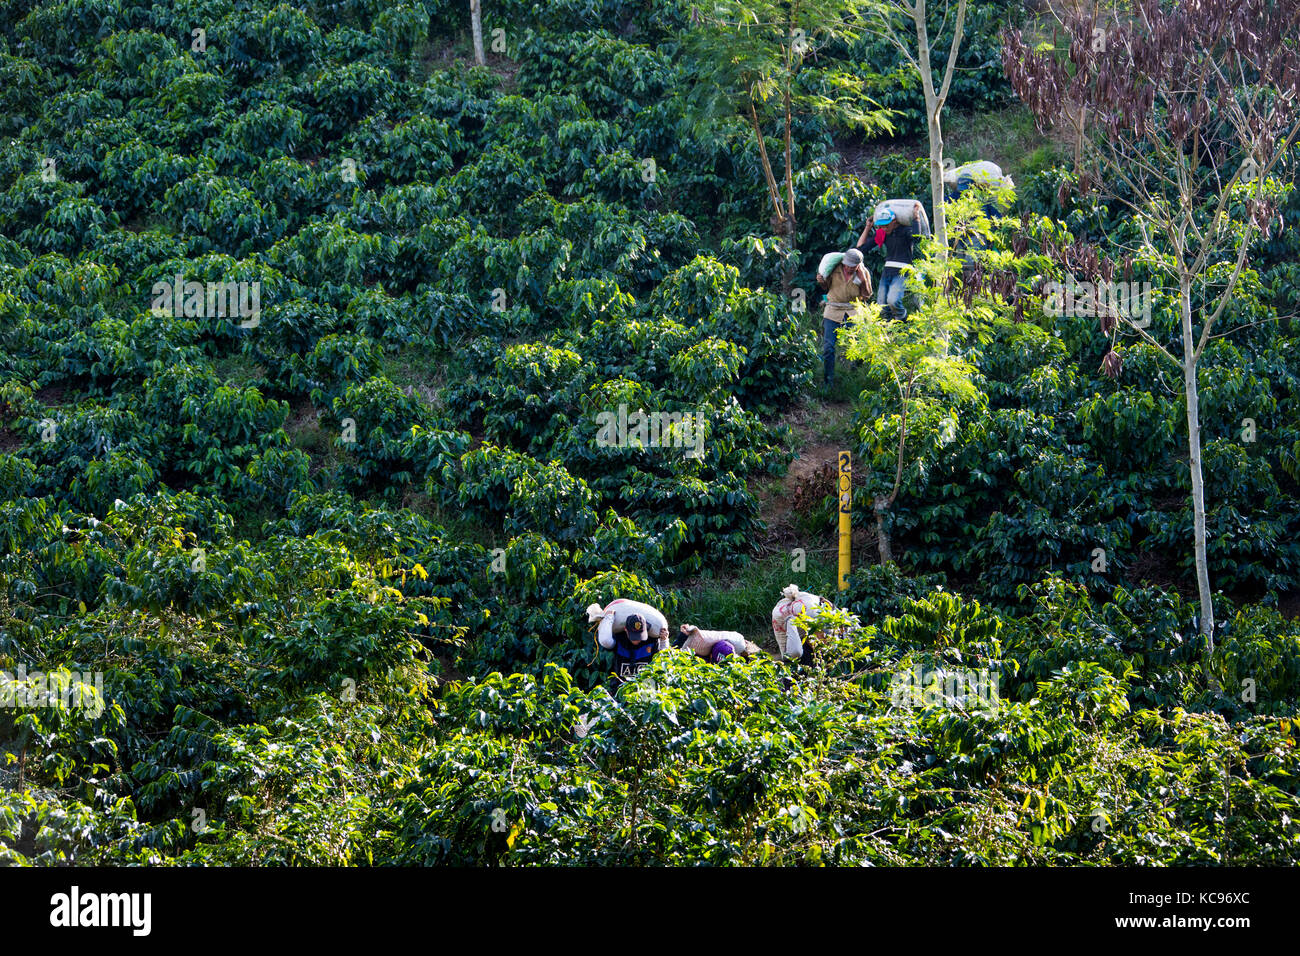 Pickers carrying beans from the field, Hacienda Venecia Coffee Farm, Manizales, Colombia Stock Photo